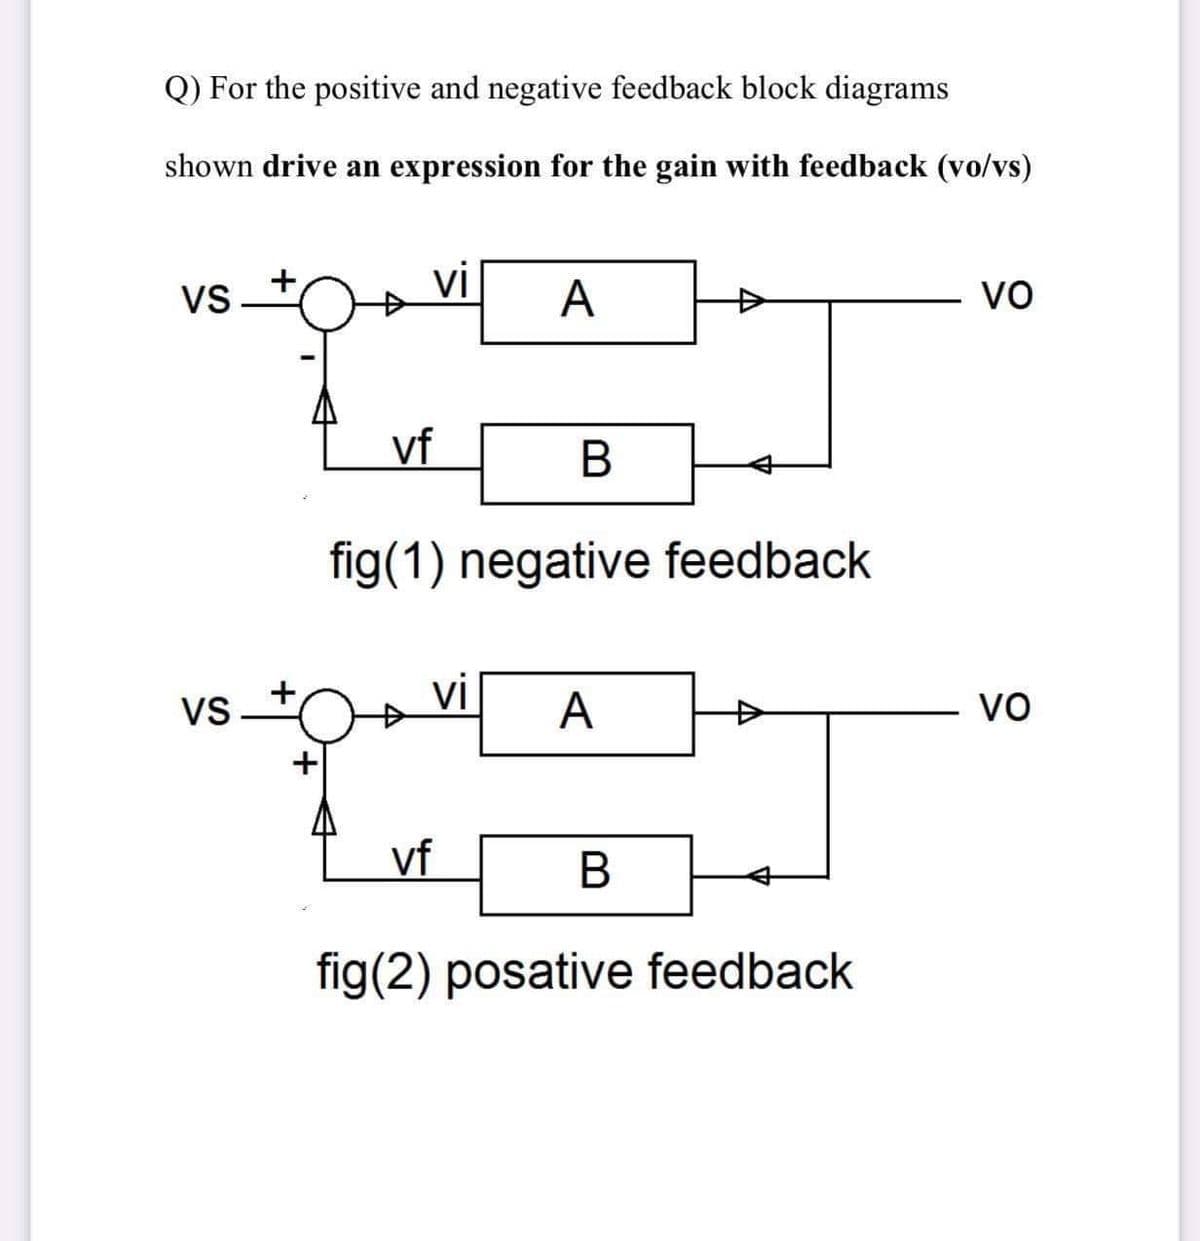 Q) For the positive and negative feedback block diagrams
shown drive an expression for the gain with feedback (vo/vs)
VS
vi
A
VO
vf
В
fig(1) negative feedback
VS
vi
A
VO
vf
fig(2) posative feedback
